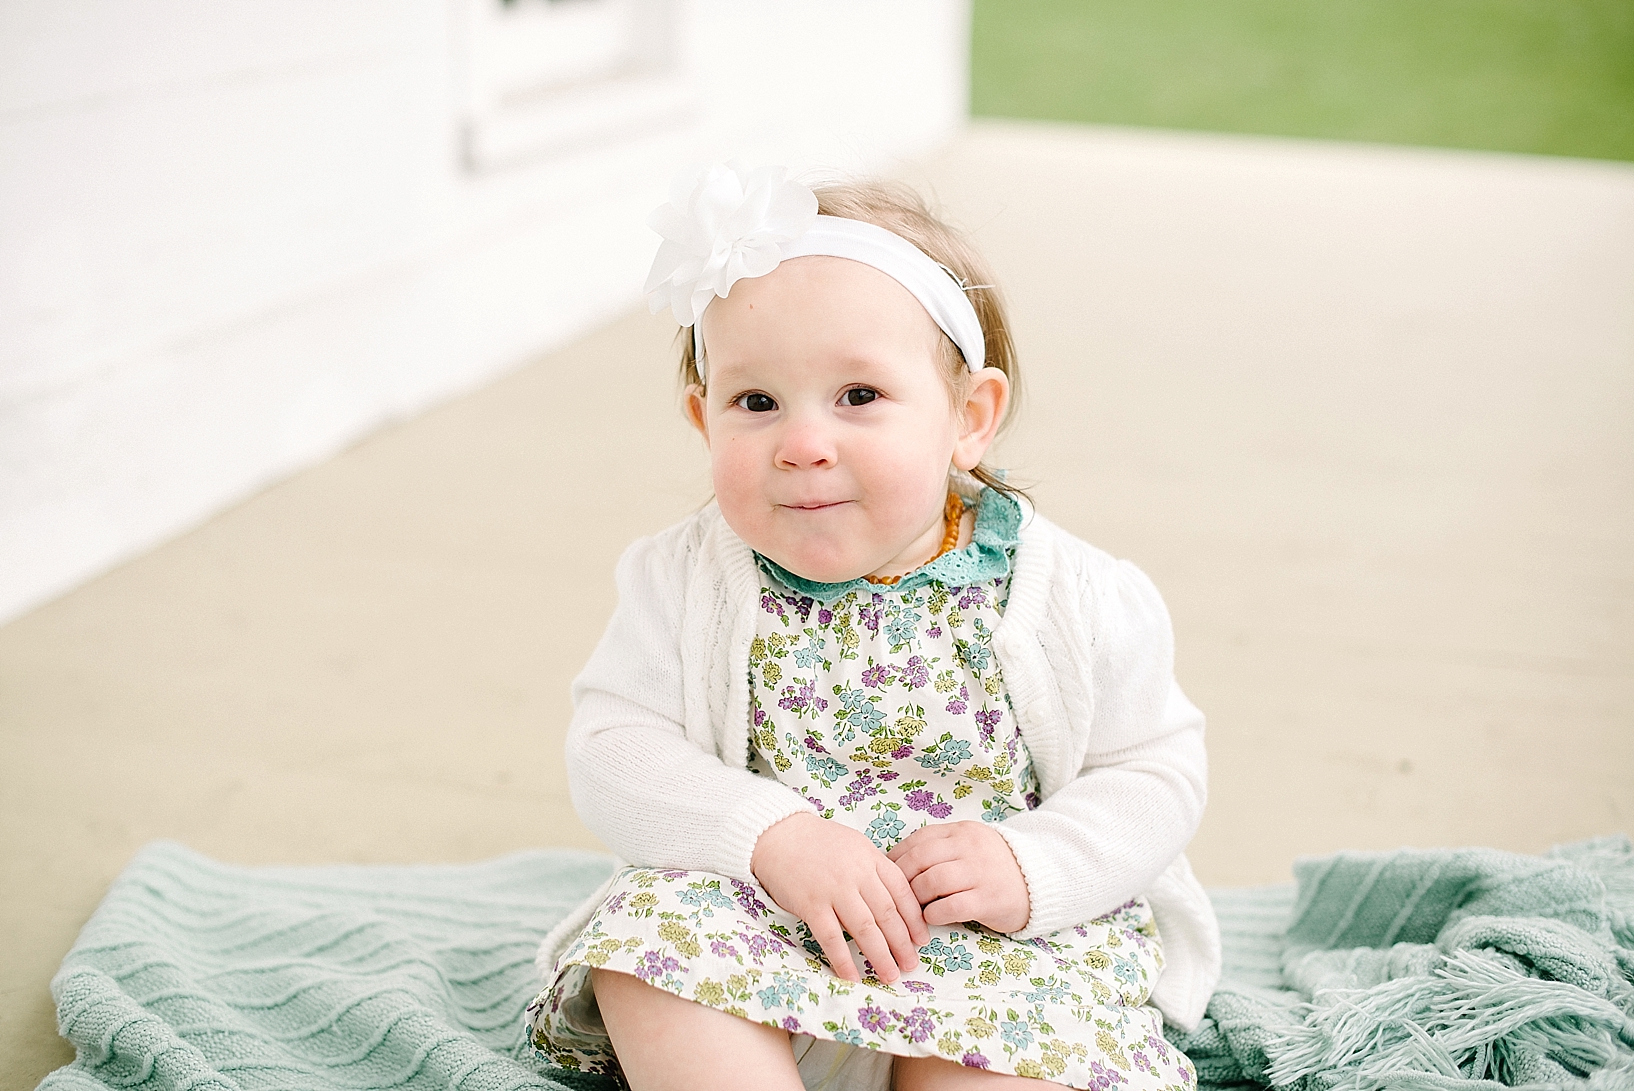 one year old girl wearing floral print dress and cream cardigan sitting on teal blanket on porch